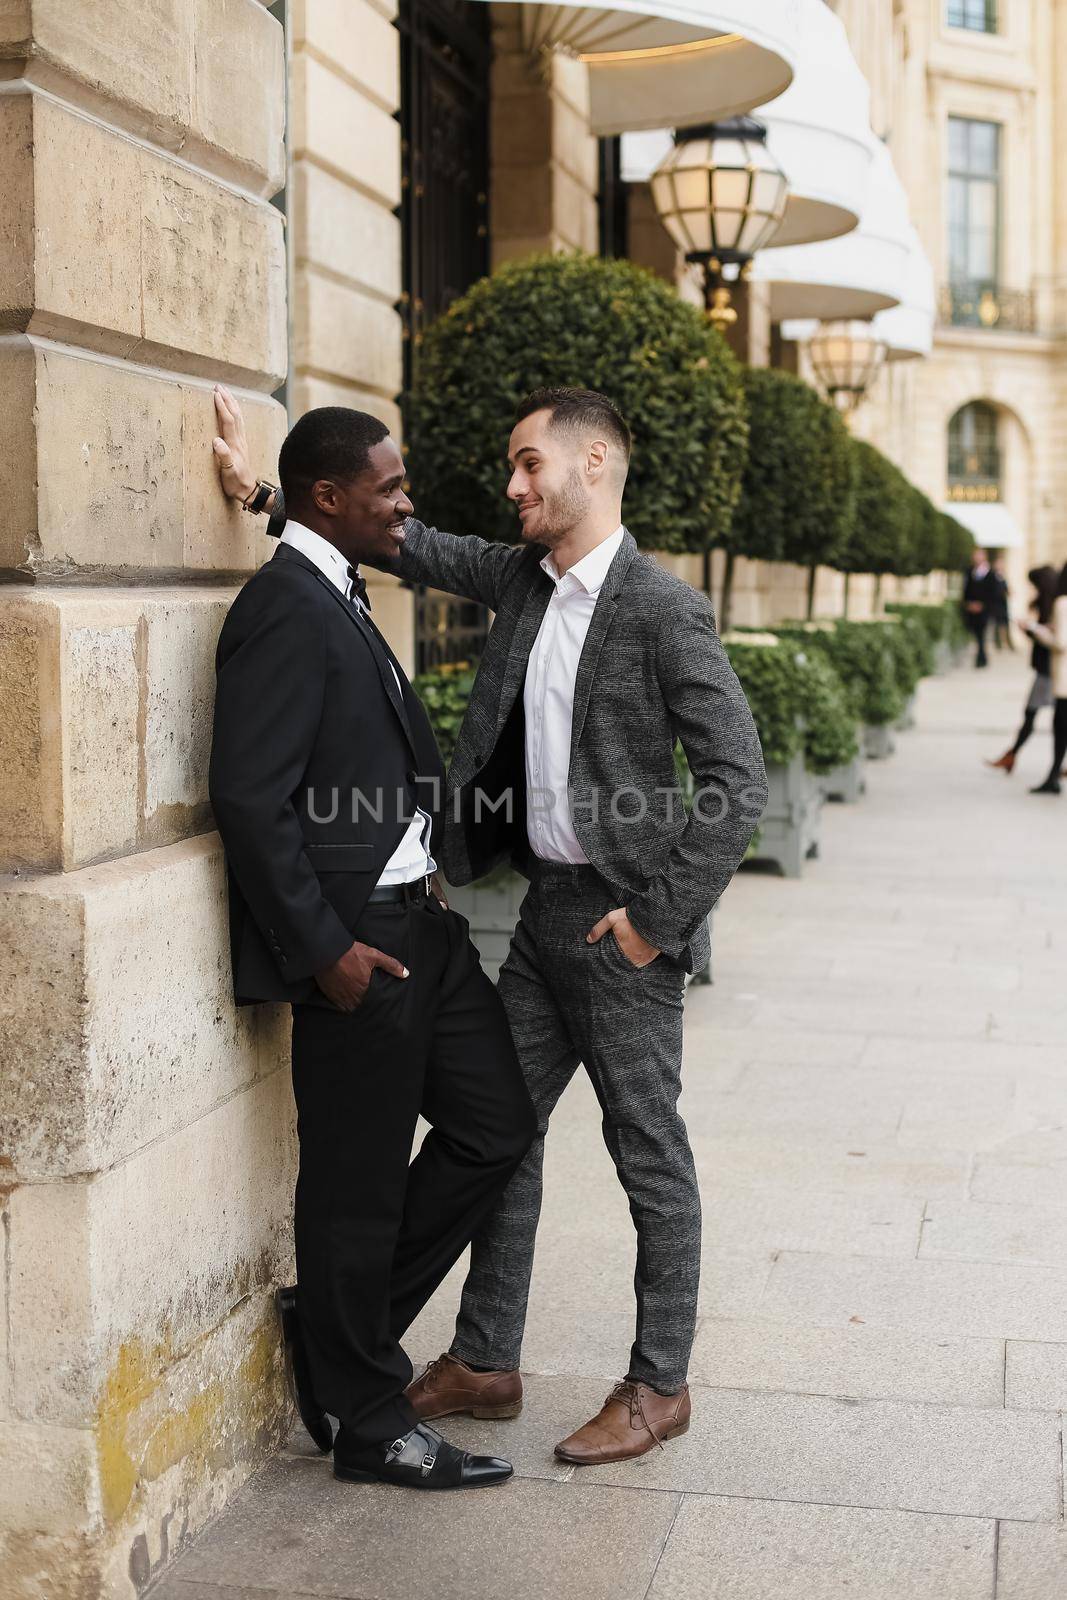 Afro american and european gays standing near building and wearing suits and talking outside. Concept of lgbt and walking in city.